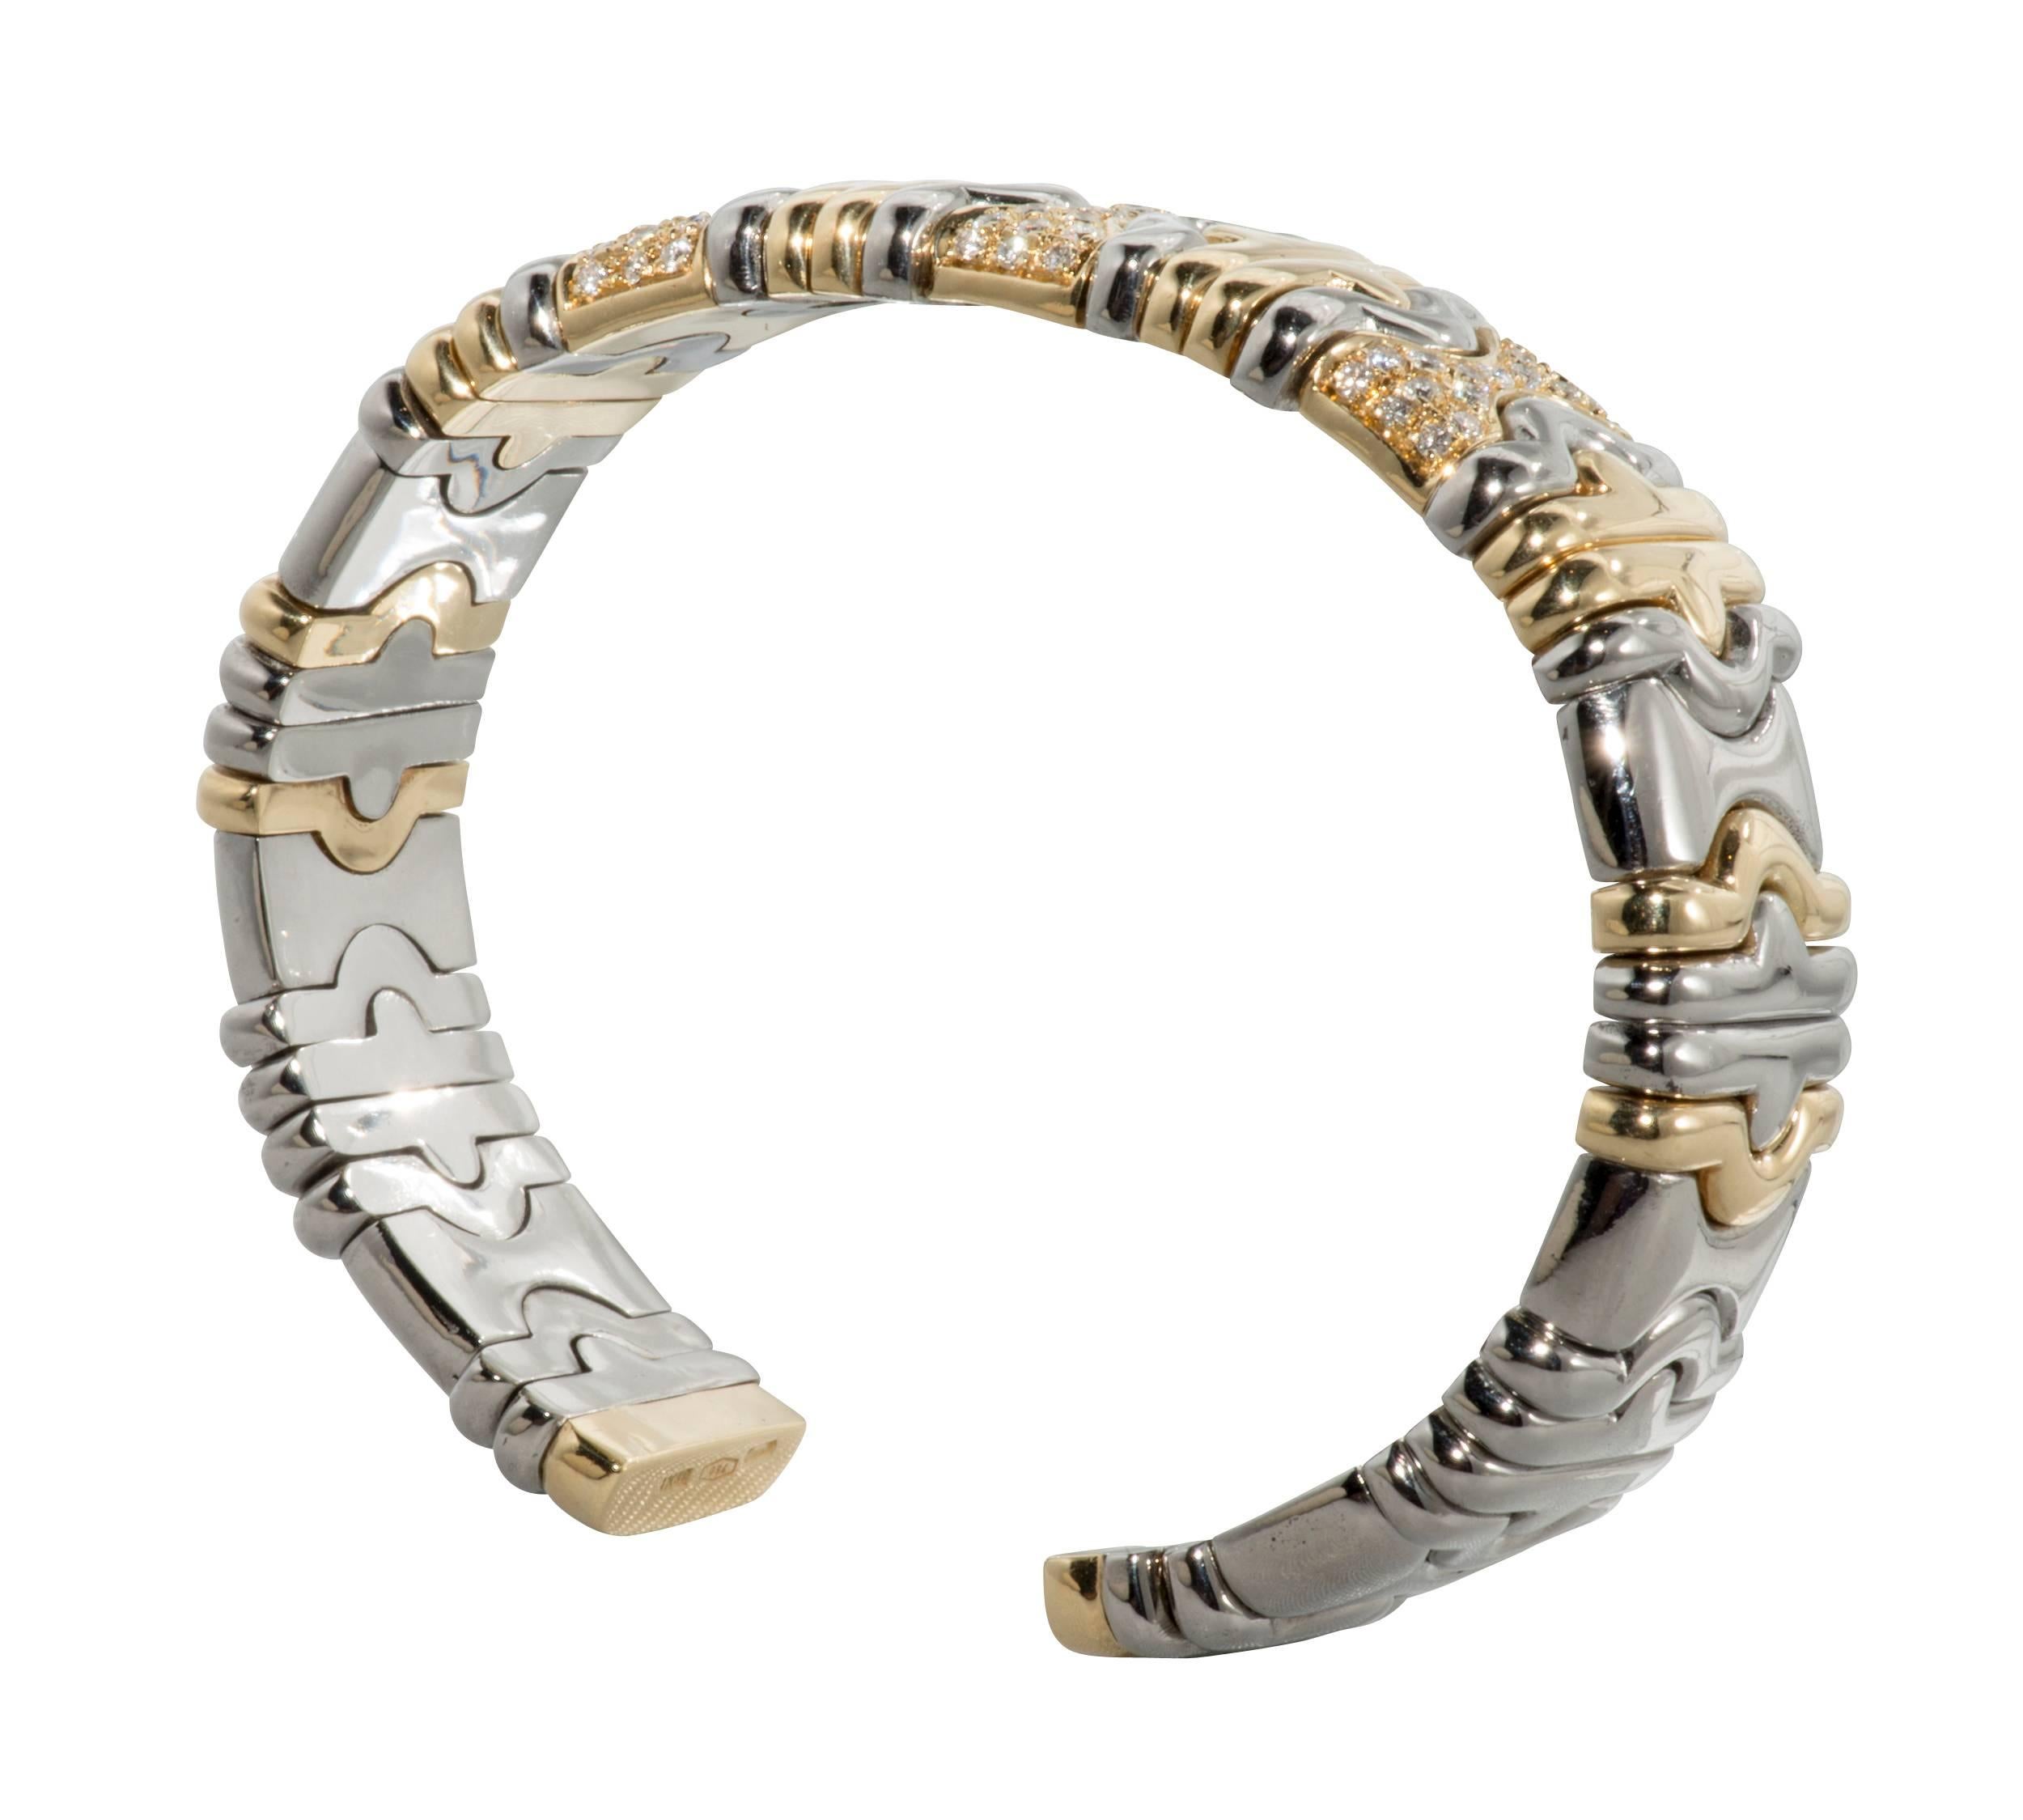 This cuff is Bulgari style of 18k yellow gold and stainless steel with diamonds.